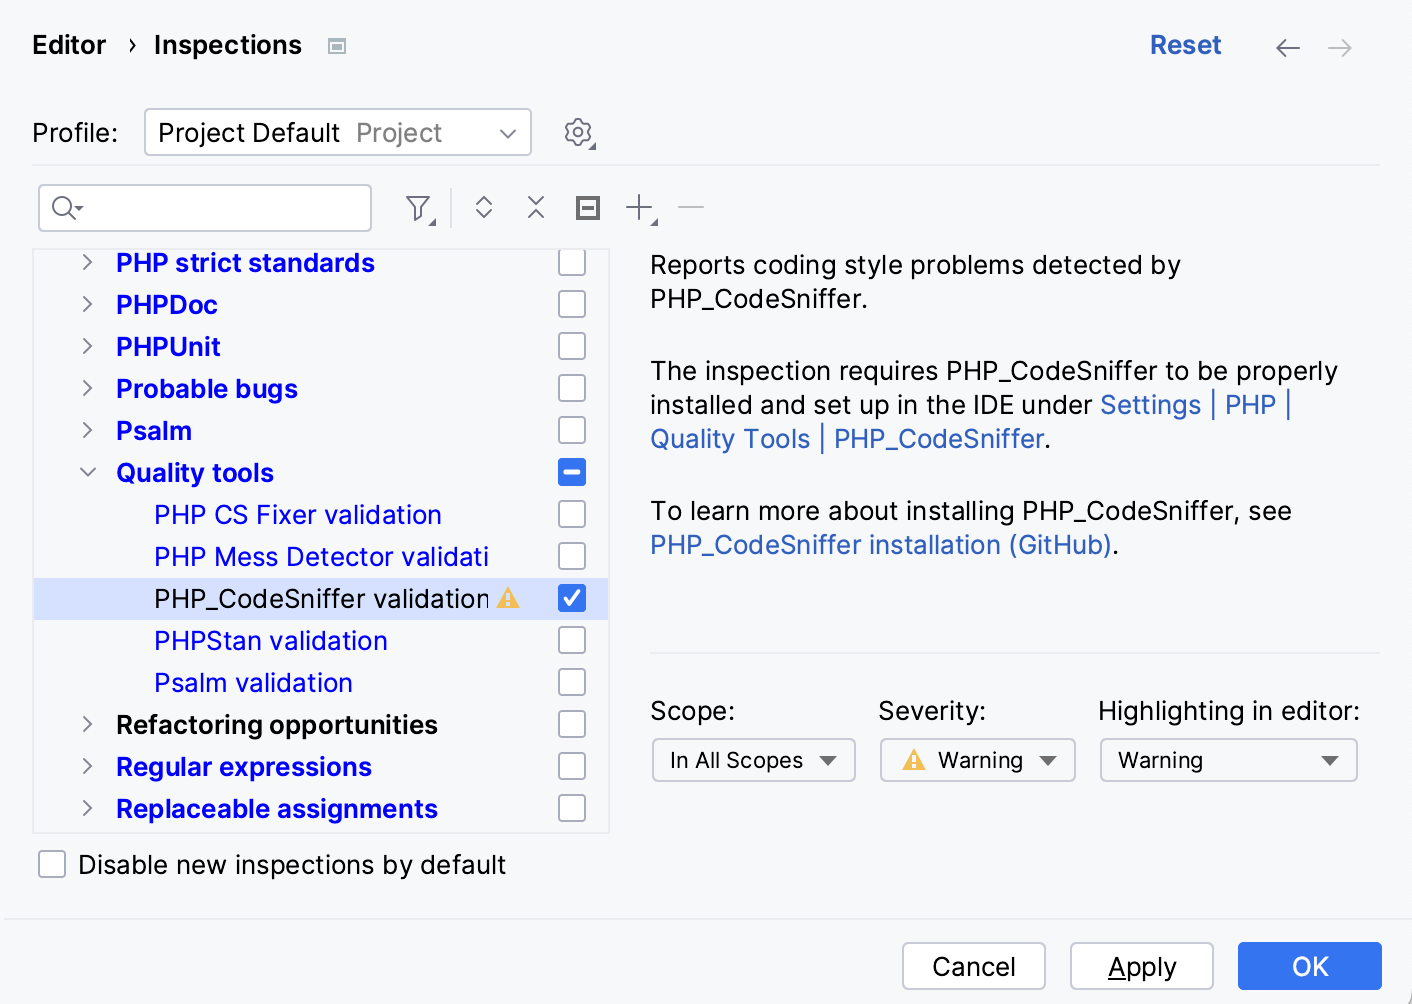 Select PHP_CodeSniffer validation checkbox